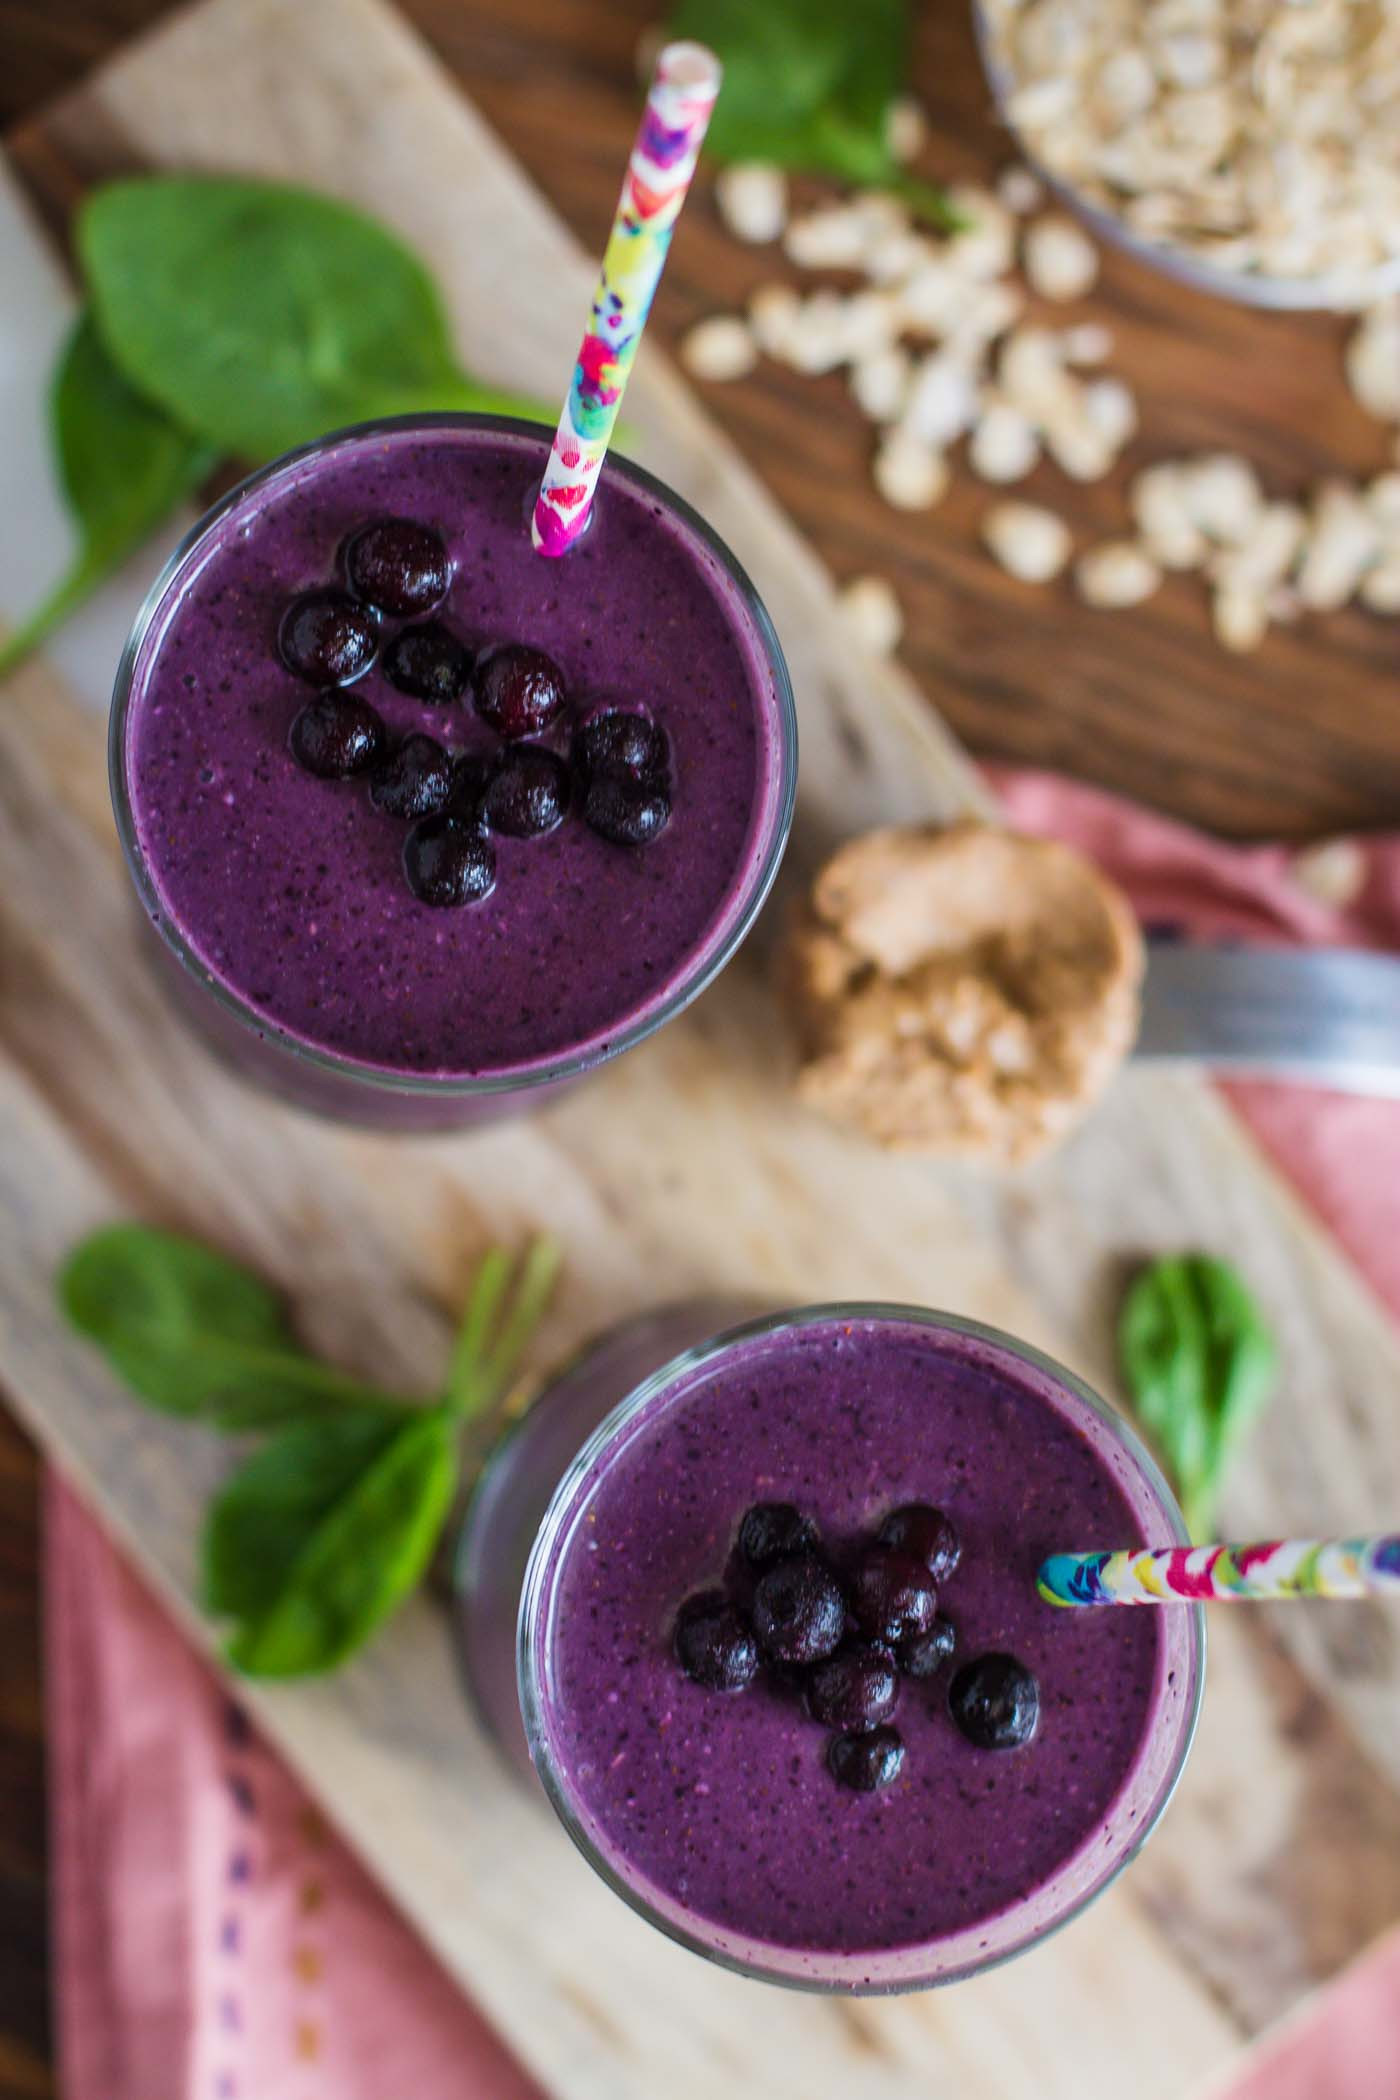 Meal Replacement Smoothie Recipes
 Meal Replacement Blueberry Green Smoothie